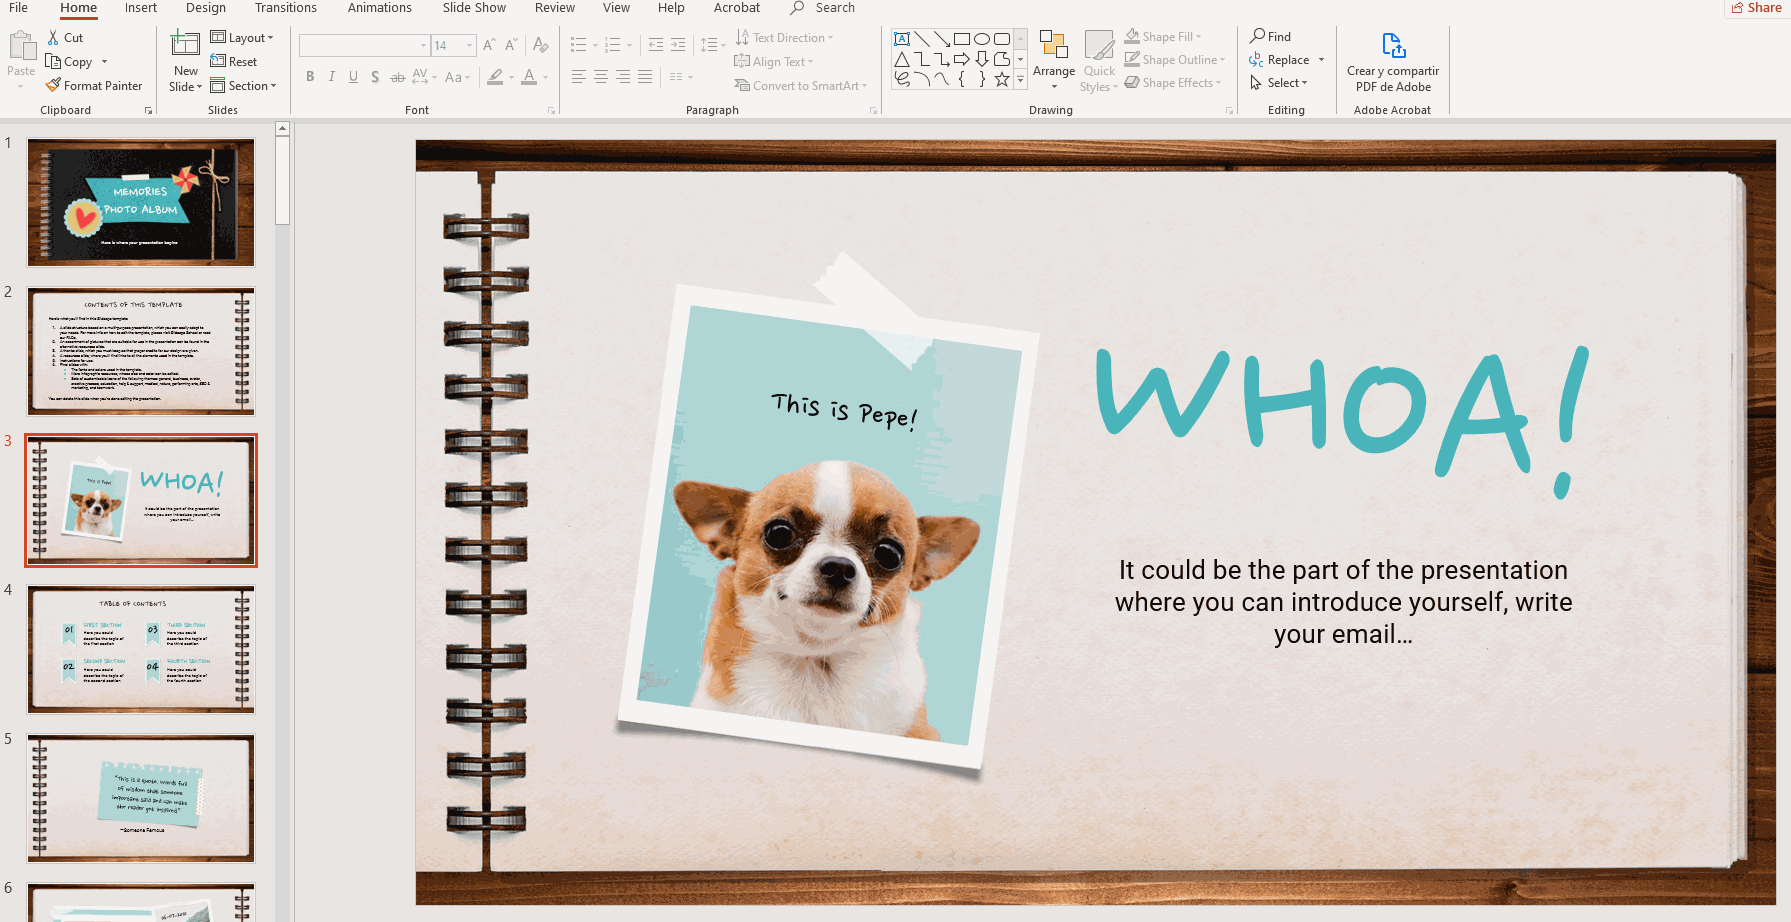 cach lam powerpoint 4 1